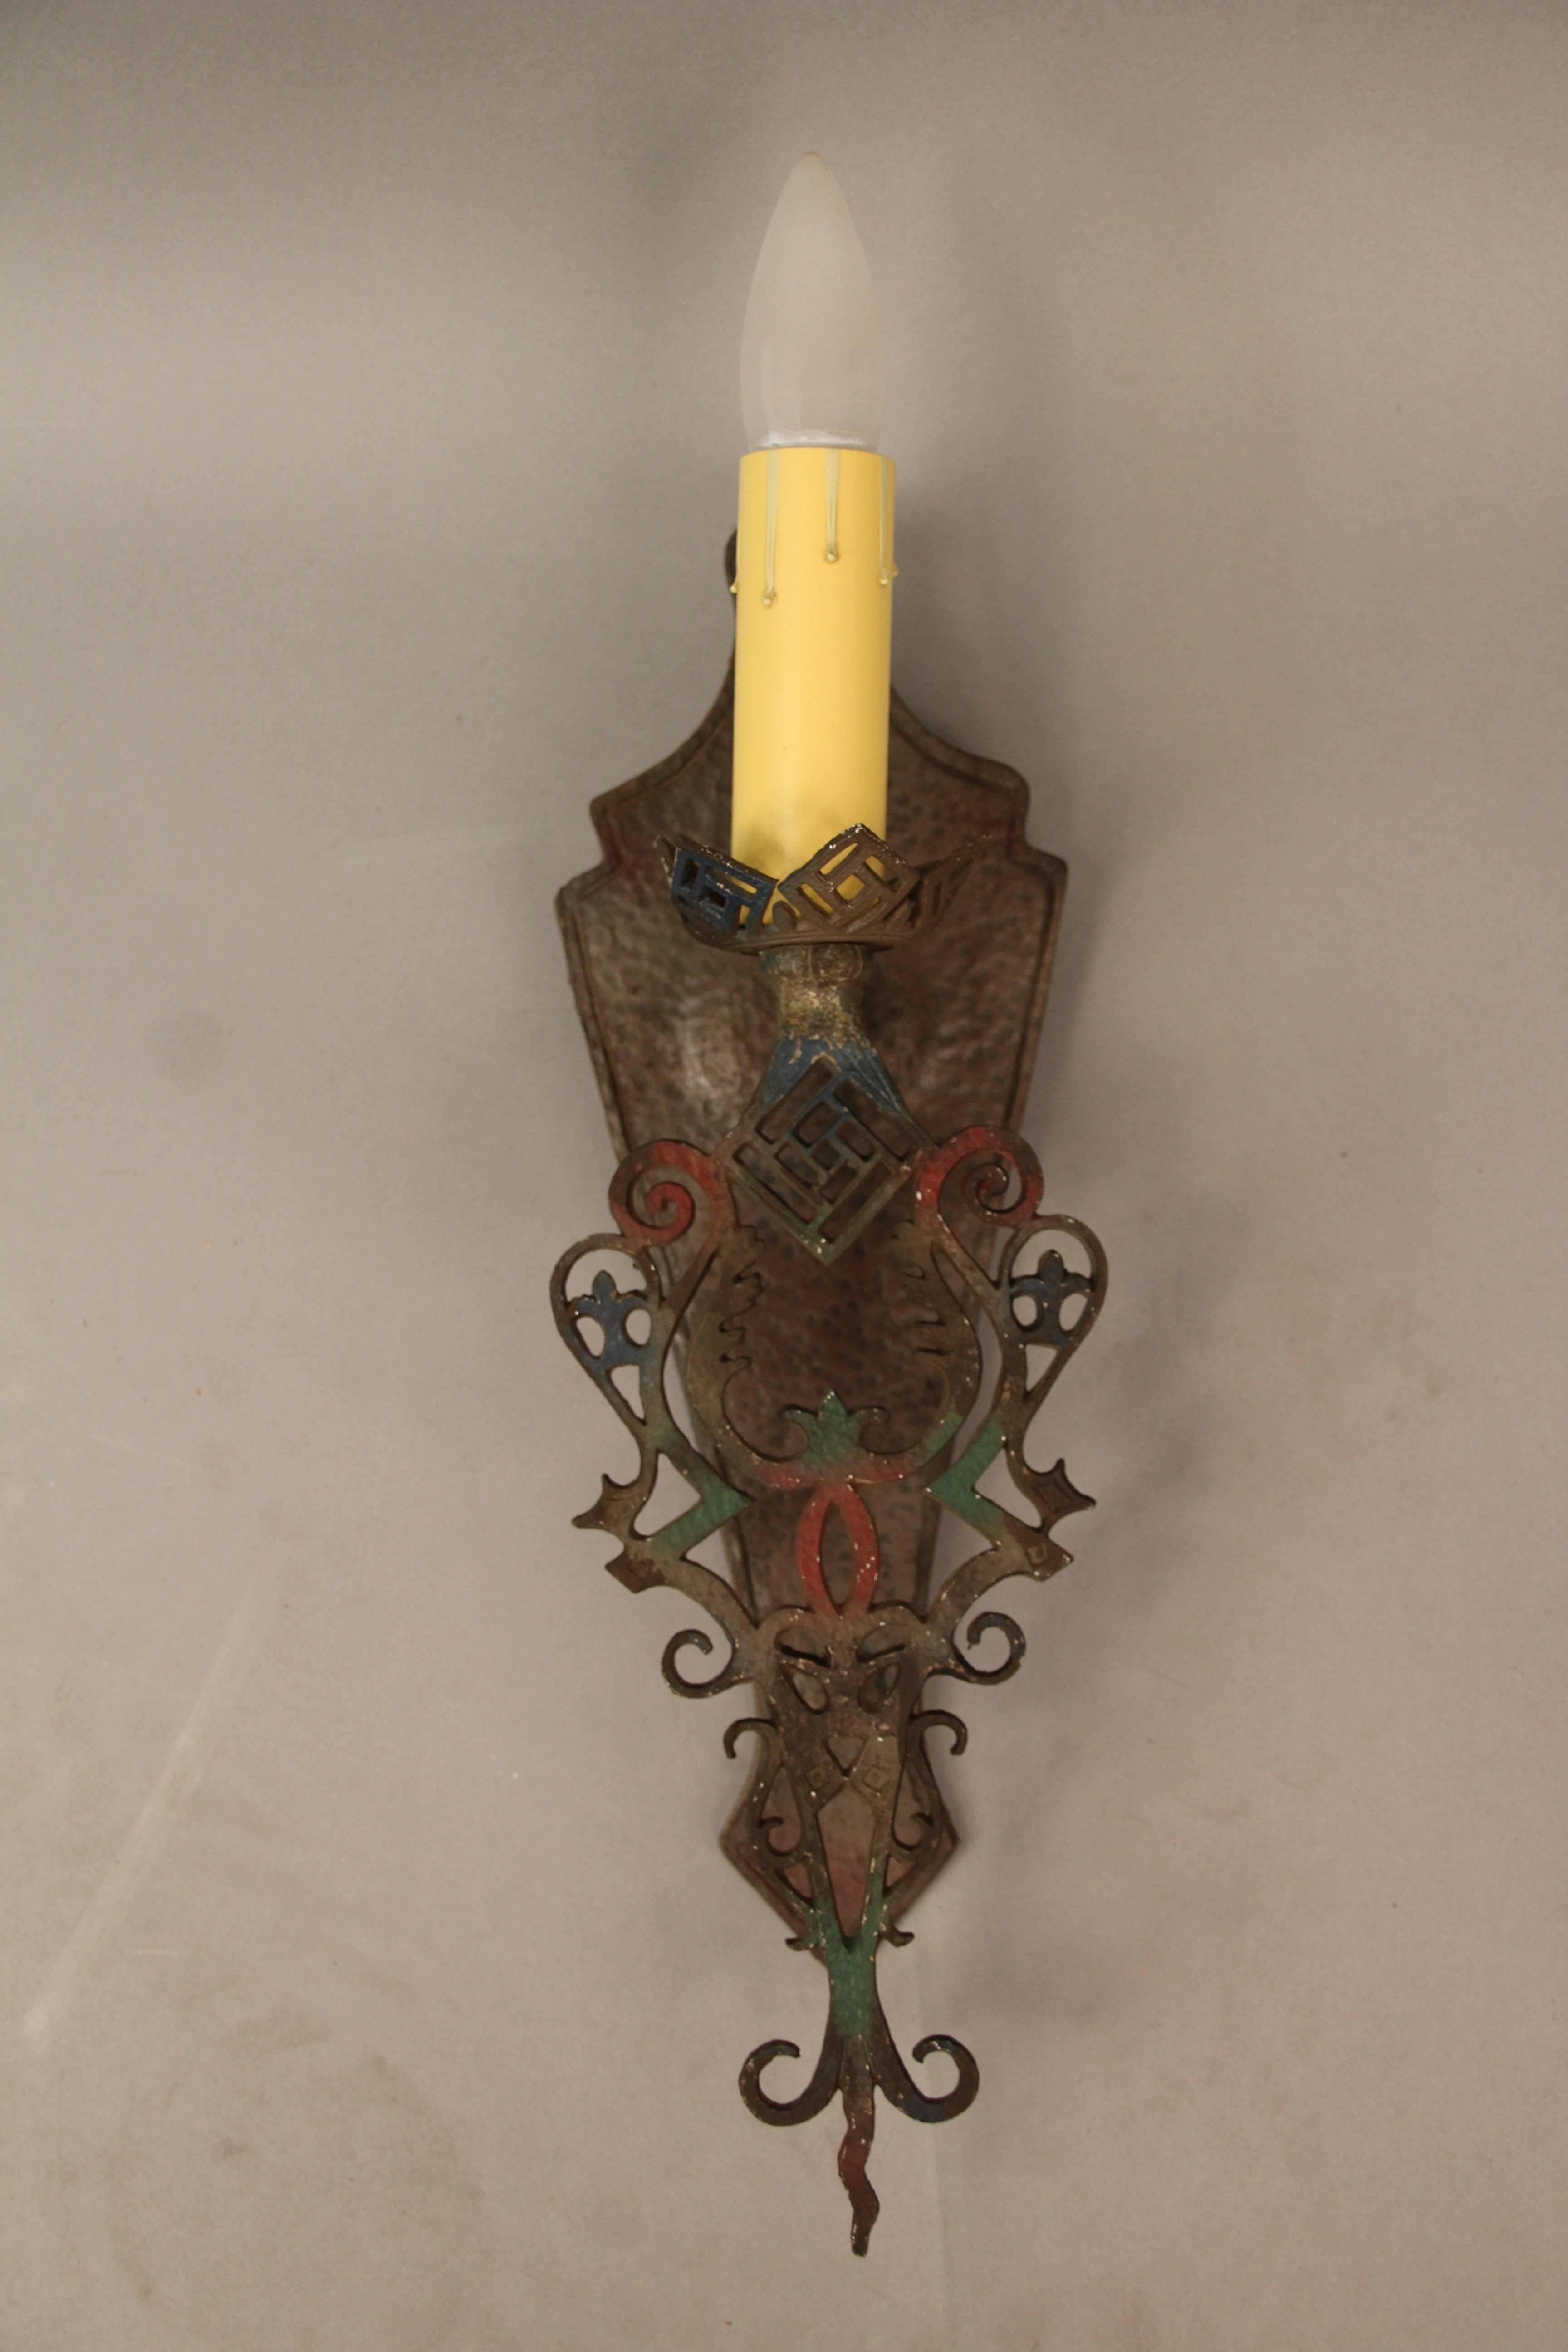 Sold and priced individually. Single Spanish Revival Sconce with original polychrome finish.